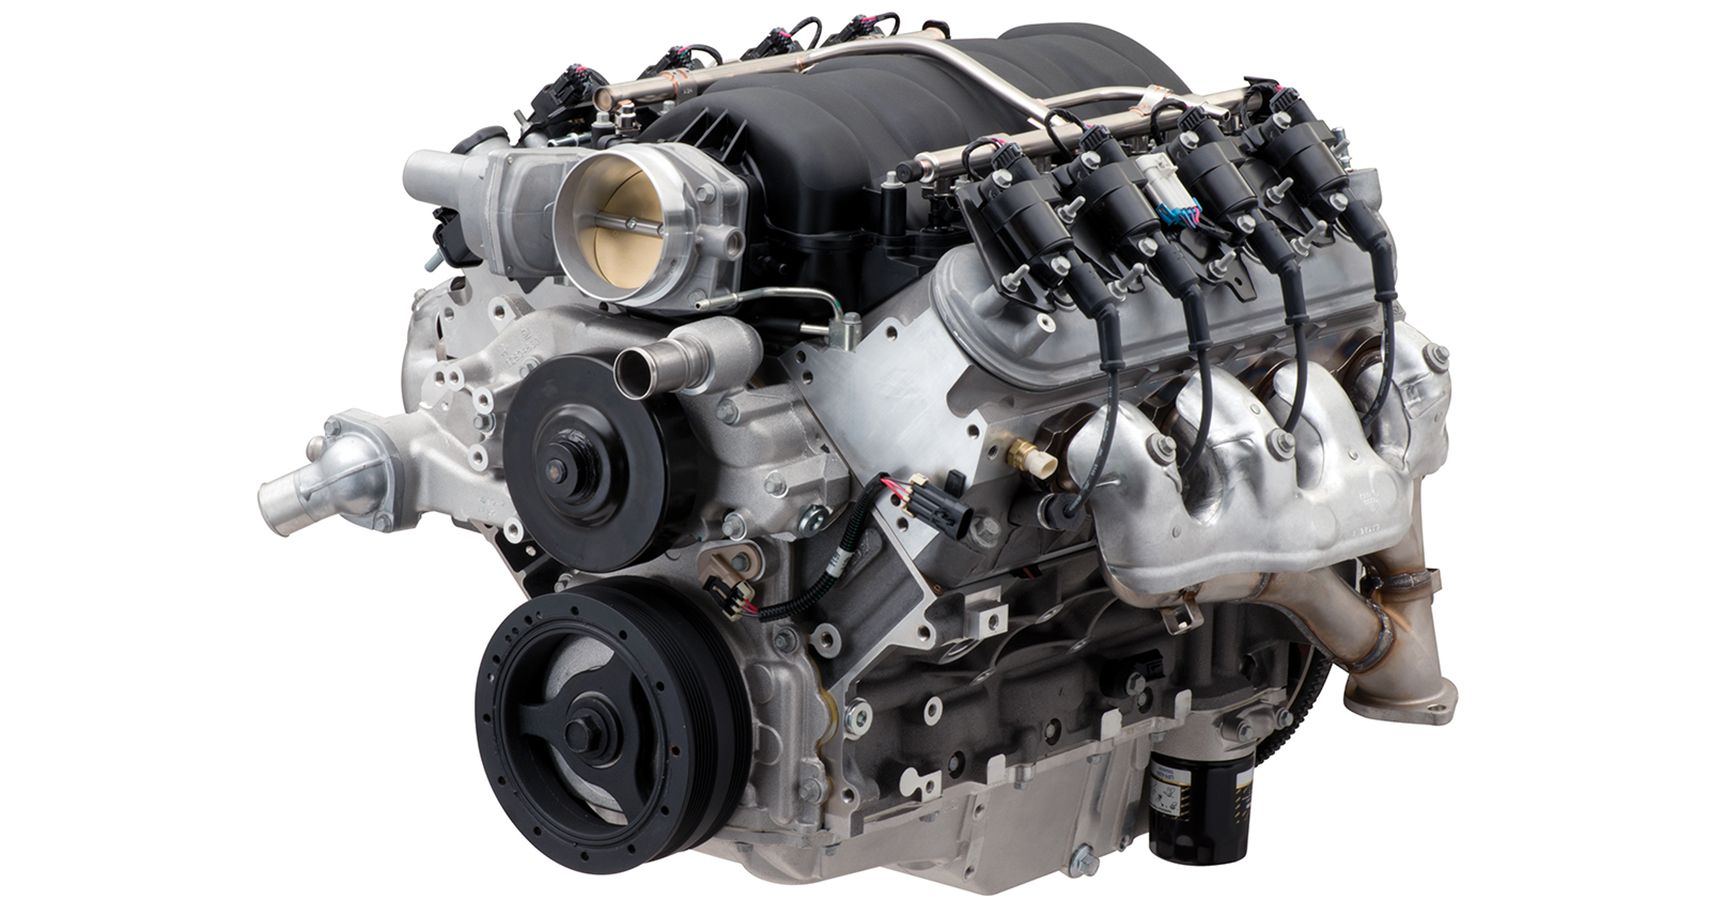 Chevrolet Performance's LS427/570 crate engine